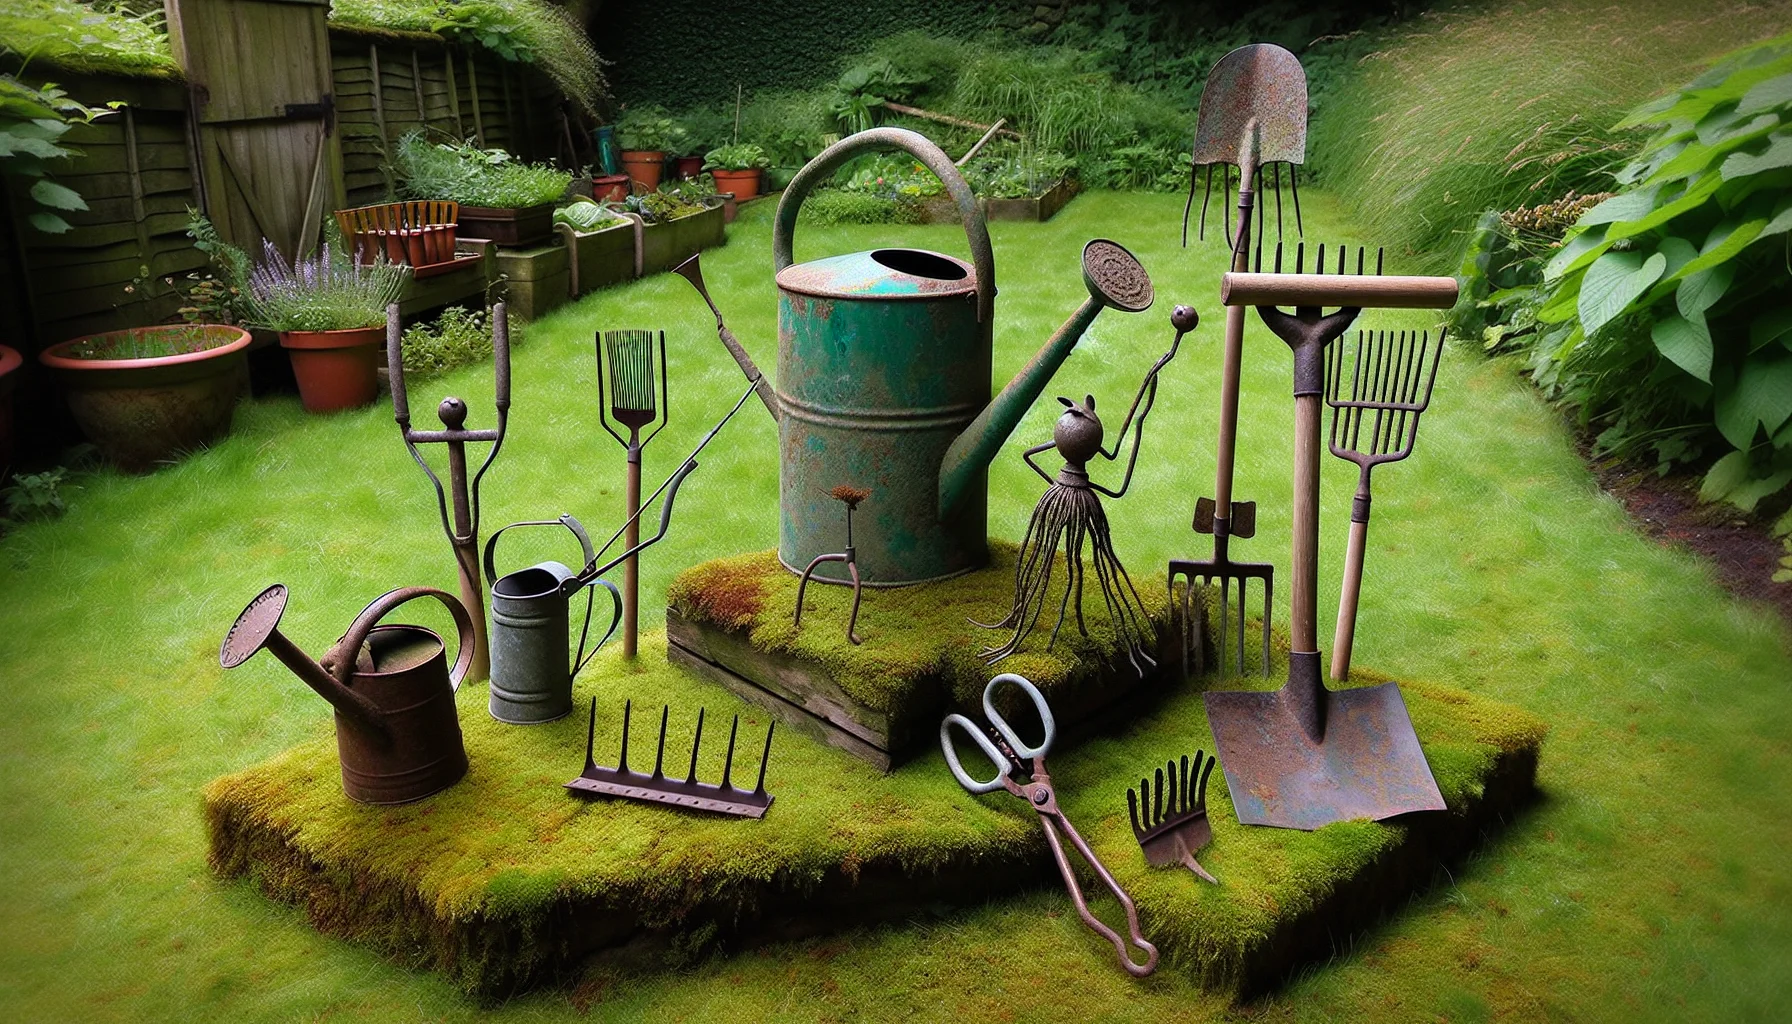 Create an image presenting a whimsical scene set in an antiquated garden. The gardening equipment - such as tarnished watering cans, weathered wooden rakes, and rusty shears - appear to be engaged in a comedic garden performance. A small, rusty spade seems to be conducting a garden tool symphony, and a moss-covered watering can is acting as if it's singing a powerful opera song. A rake with a broken handle seems to be attempting a ballet pose on a patch of verdant grass. This amusing display of old garden tools personified forces one to smile and feel an inexplicable urge to get involved in gardening.